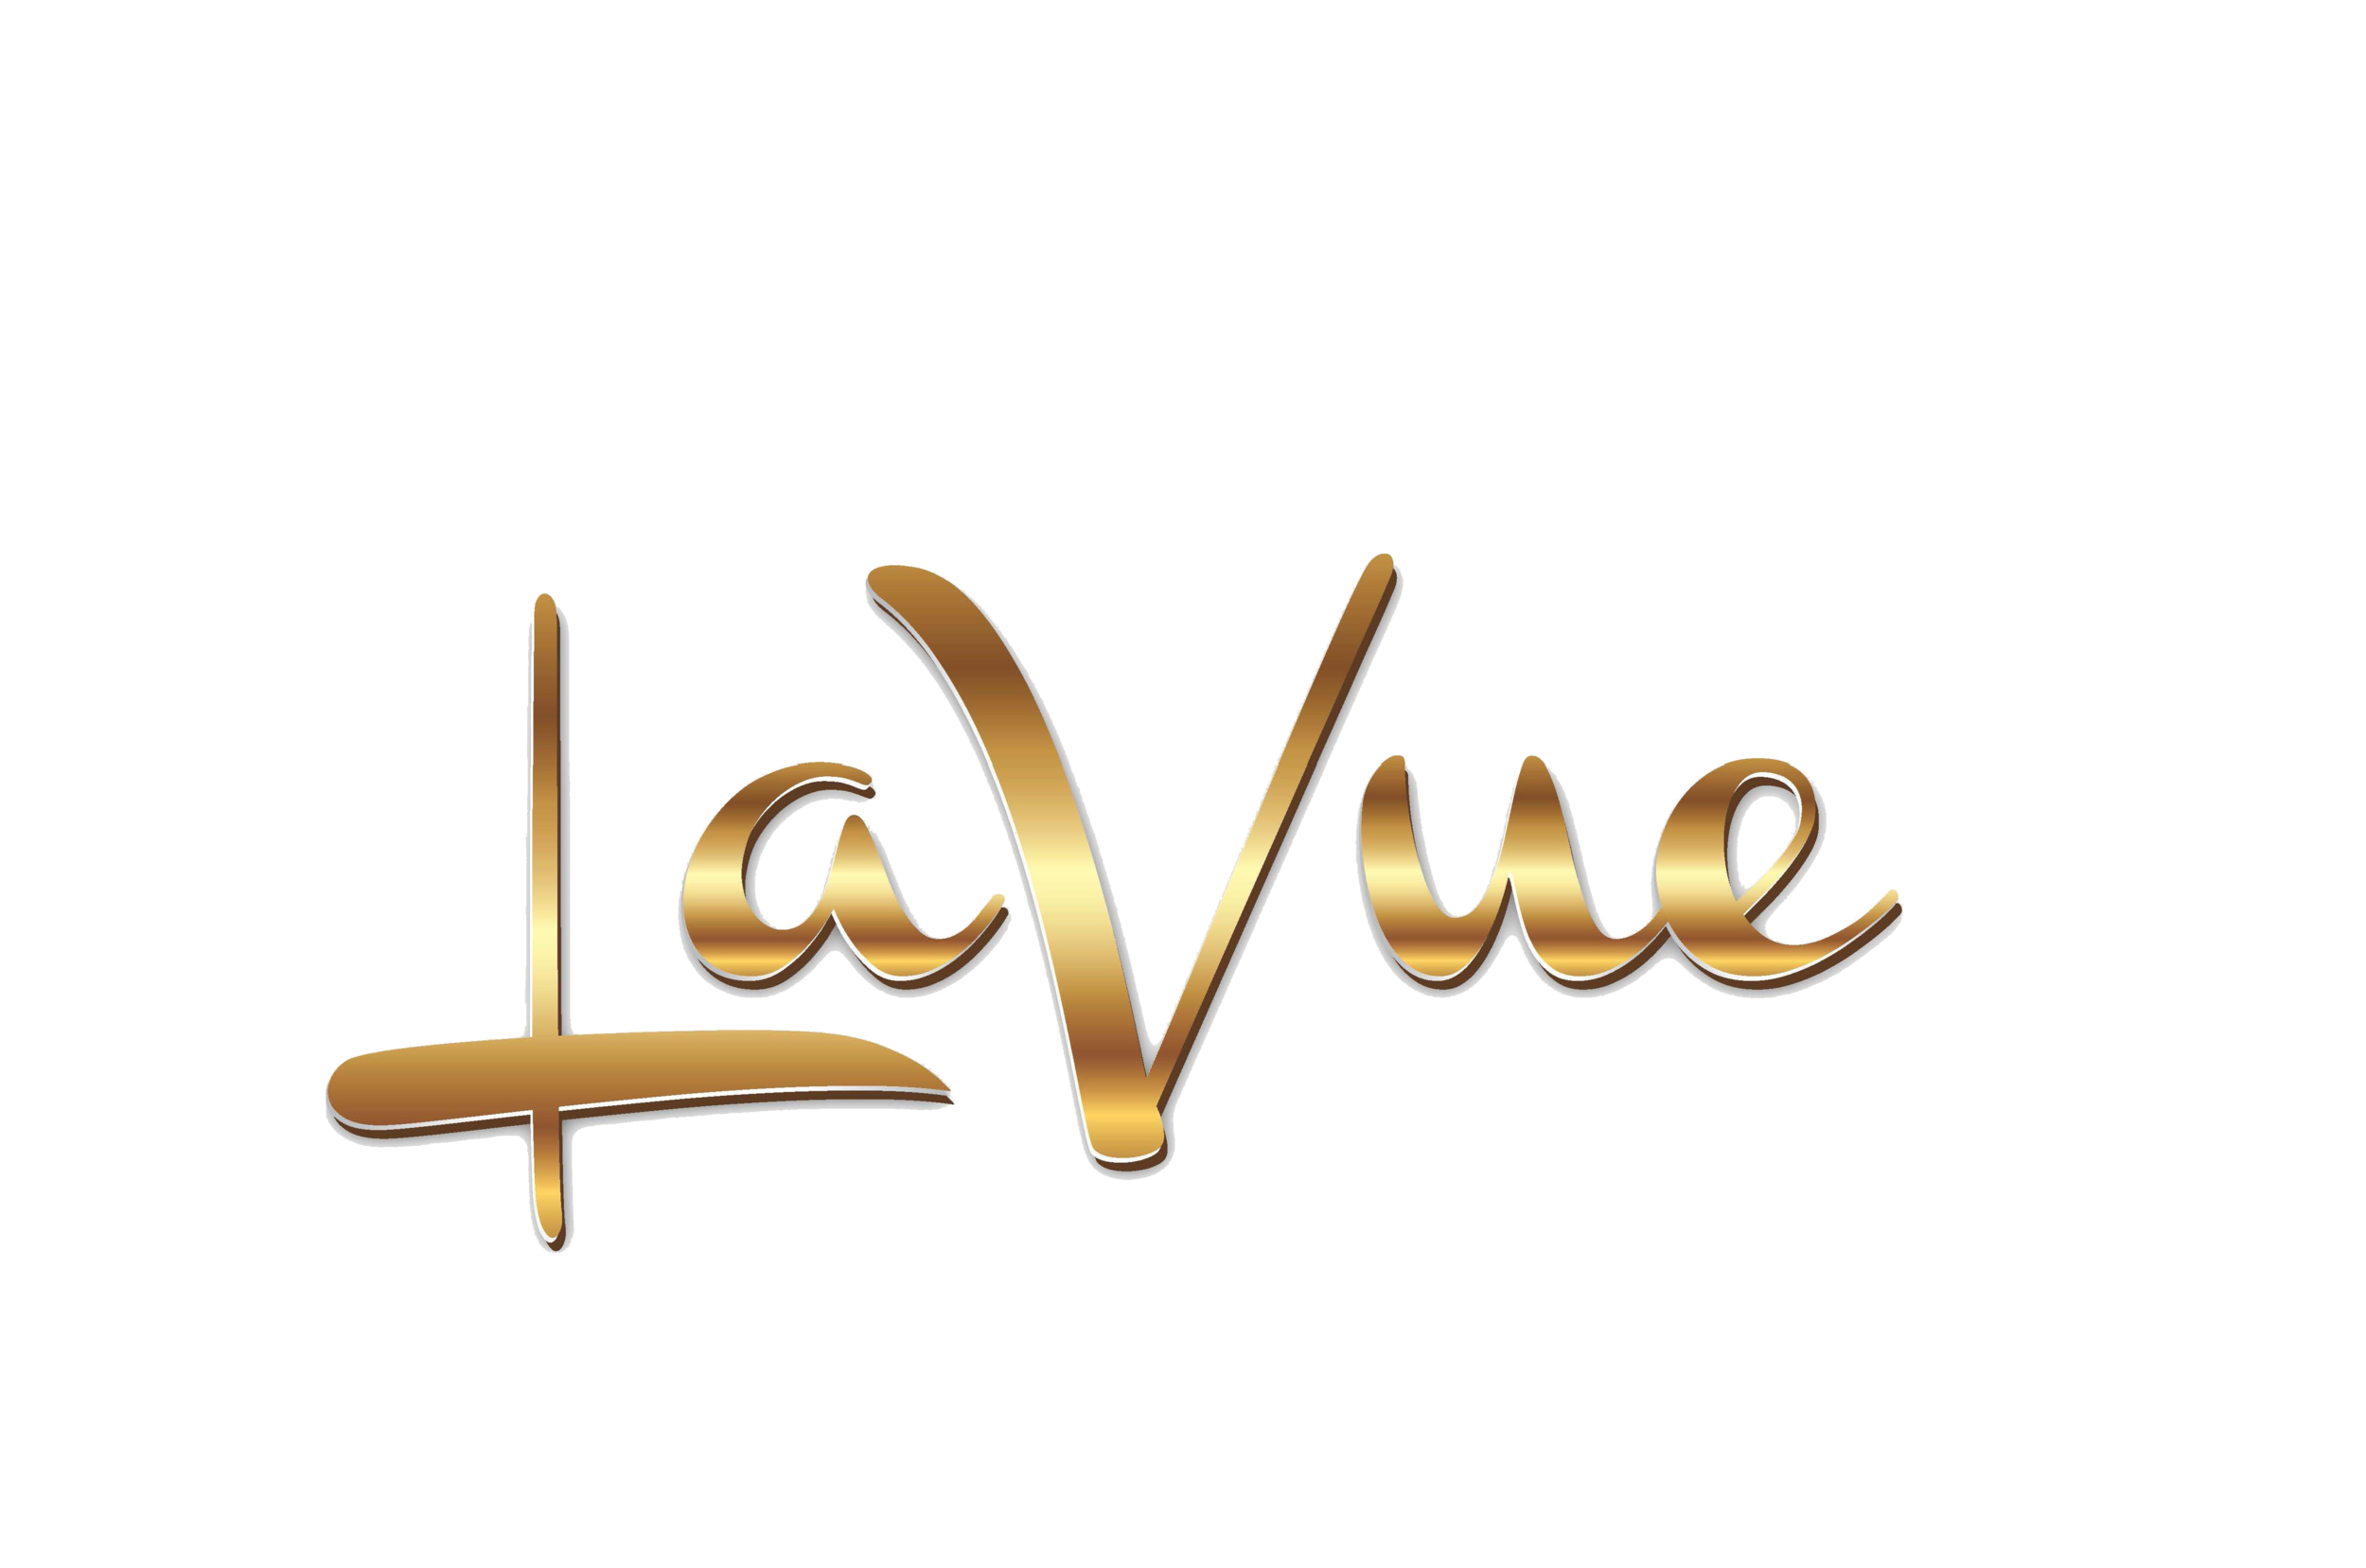 LaVUe gold.png